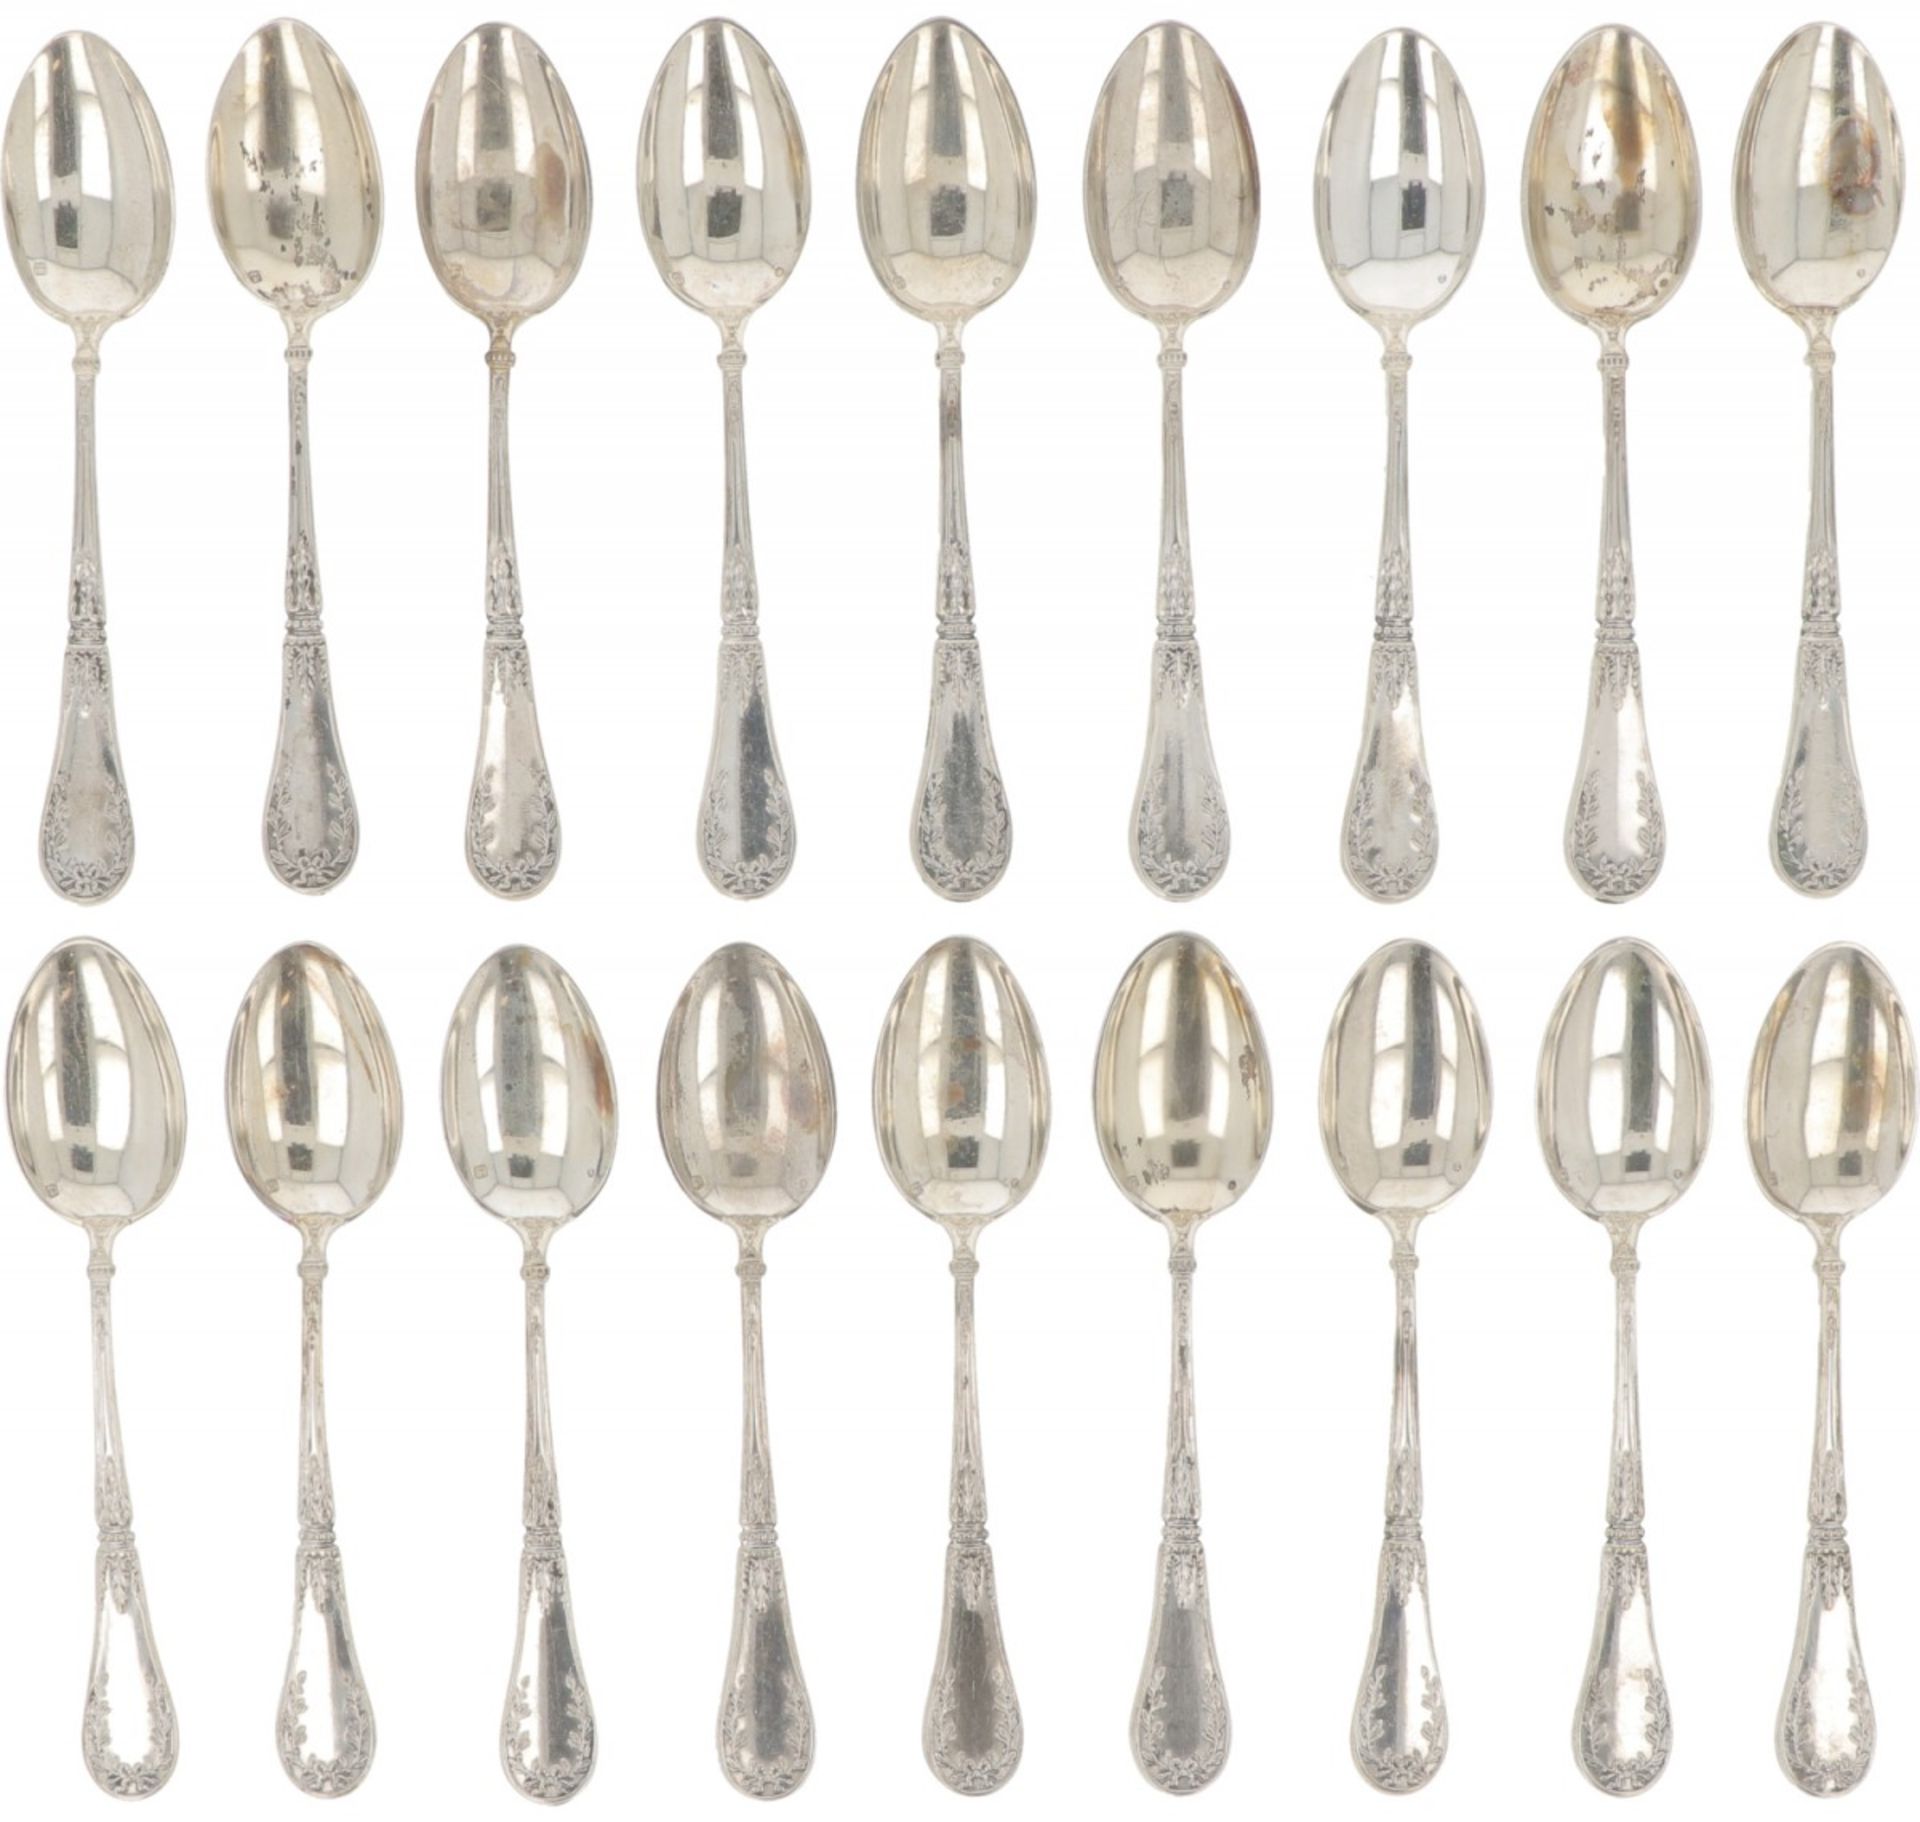 (18) piece set of silver coffee spoons.